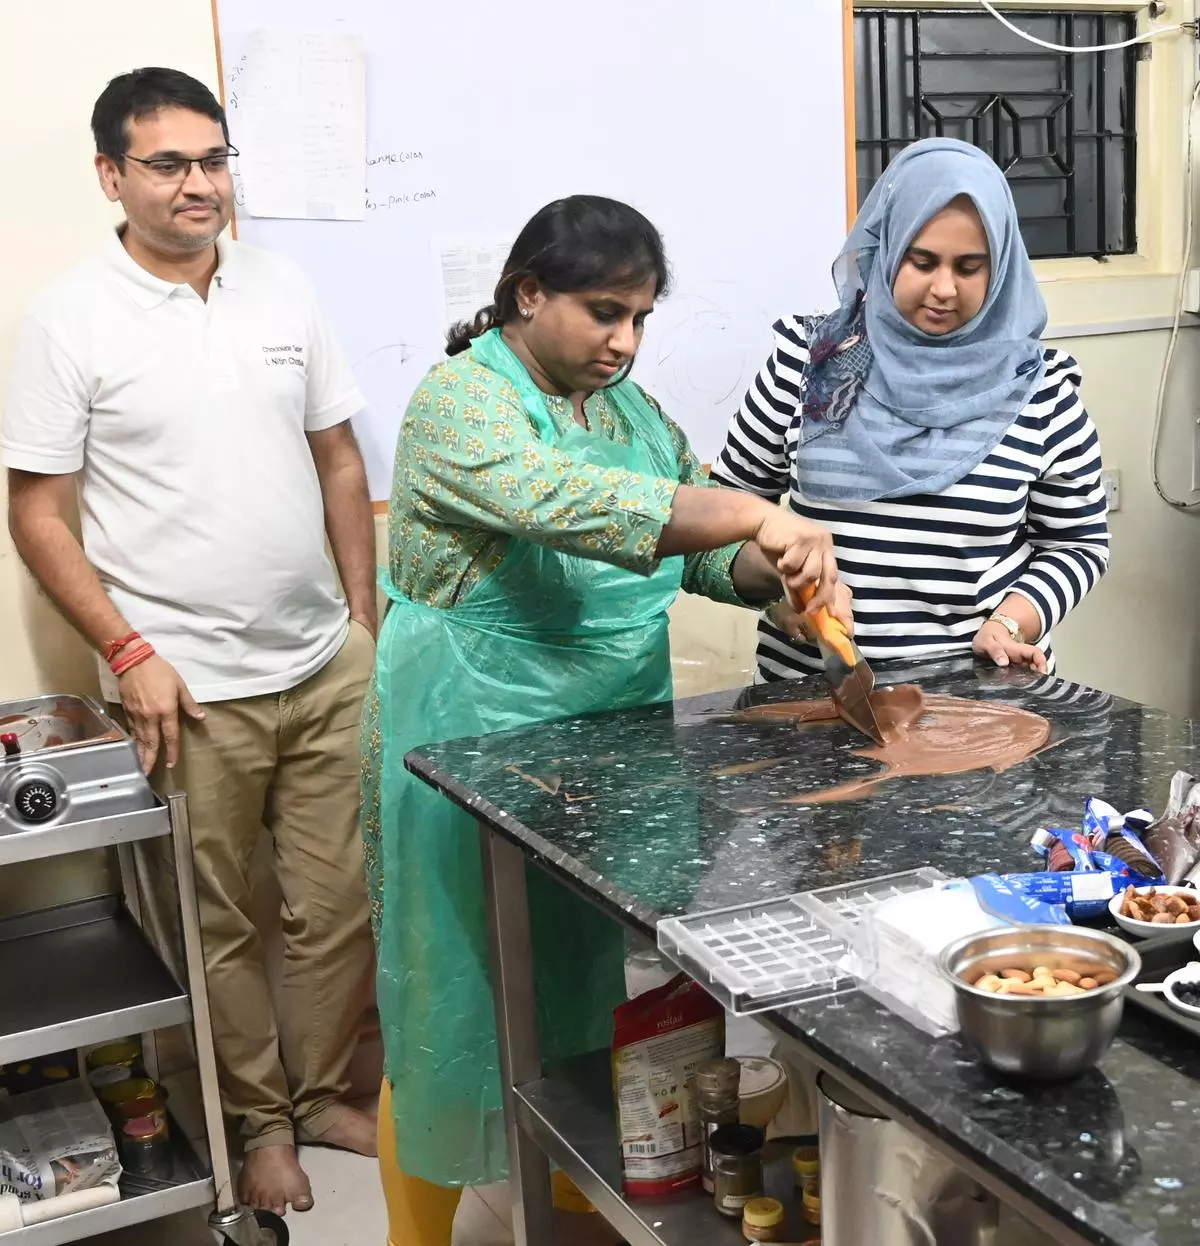 (L-R) Nitin Chordia and Poonam Chordia are in a training session with an aspiring chocolate entrepreneur